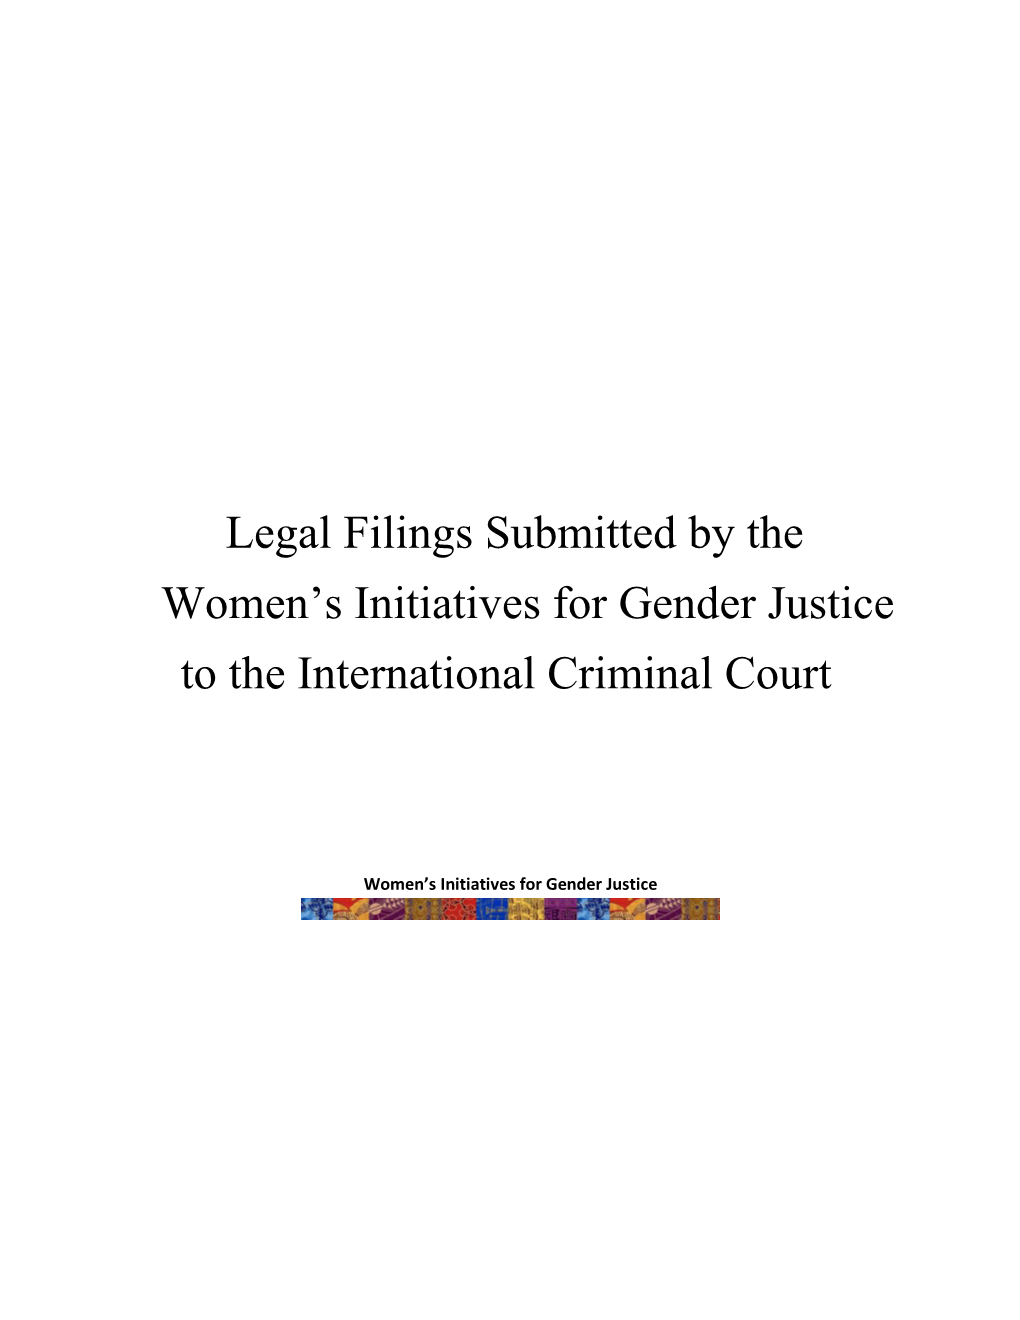 Legal Filings Submitted by the Women's Initiatives for Gender